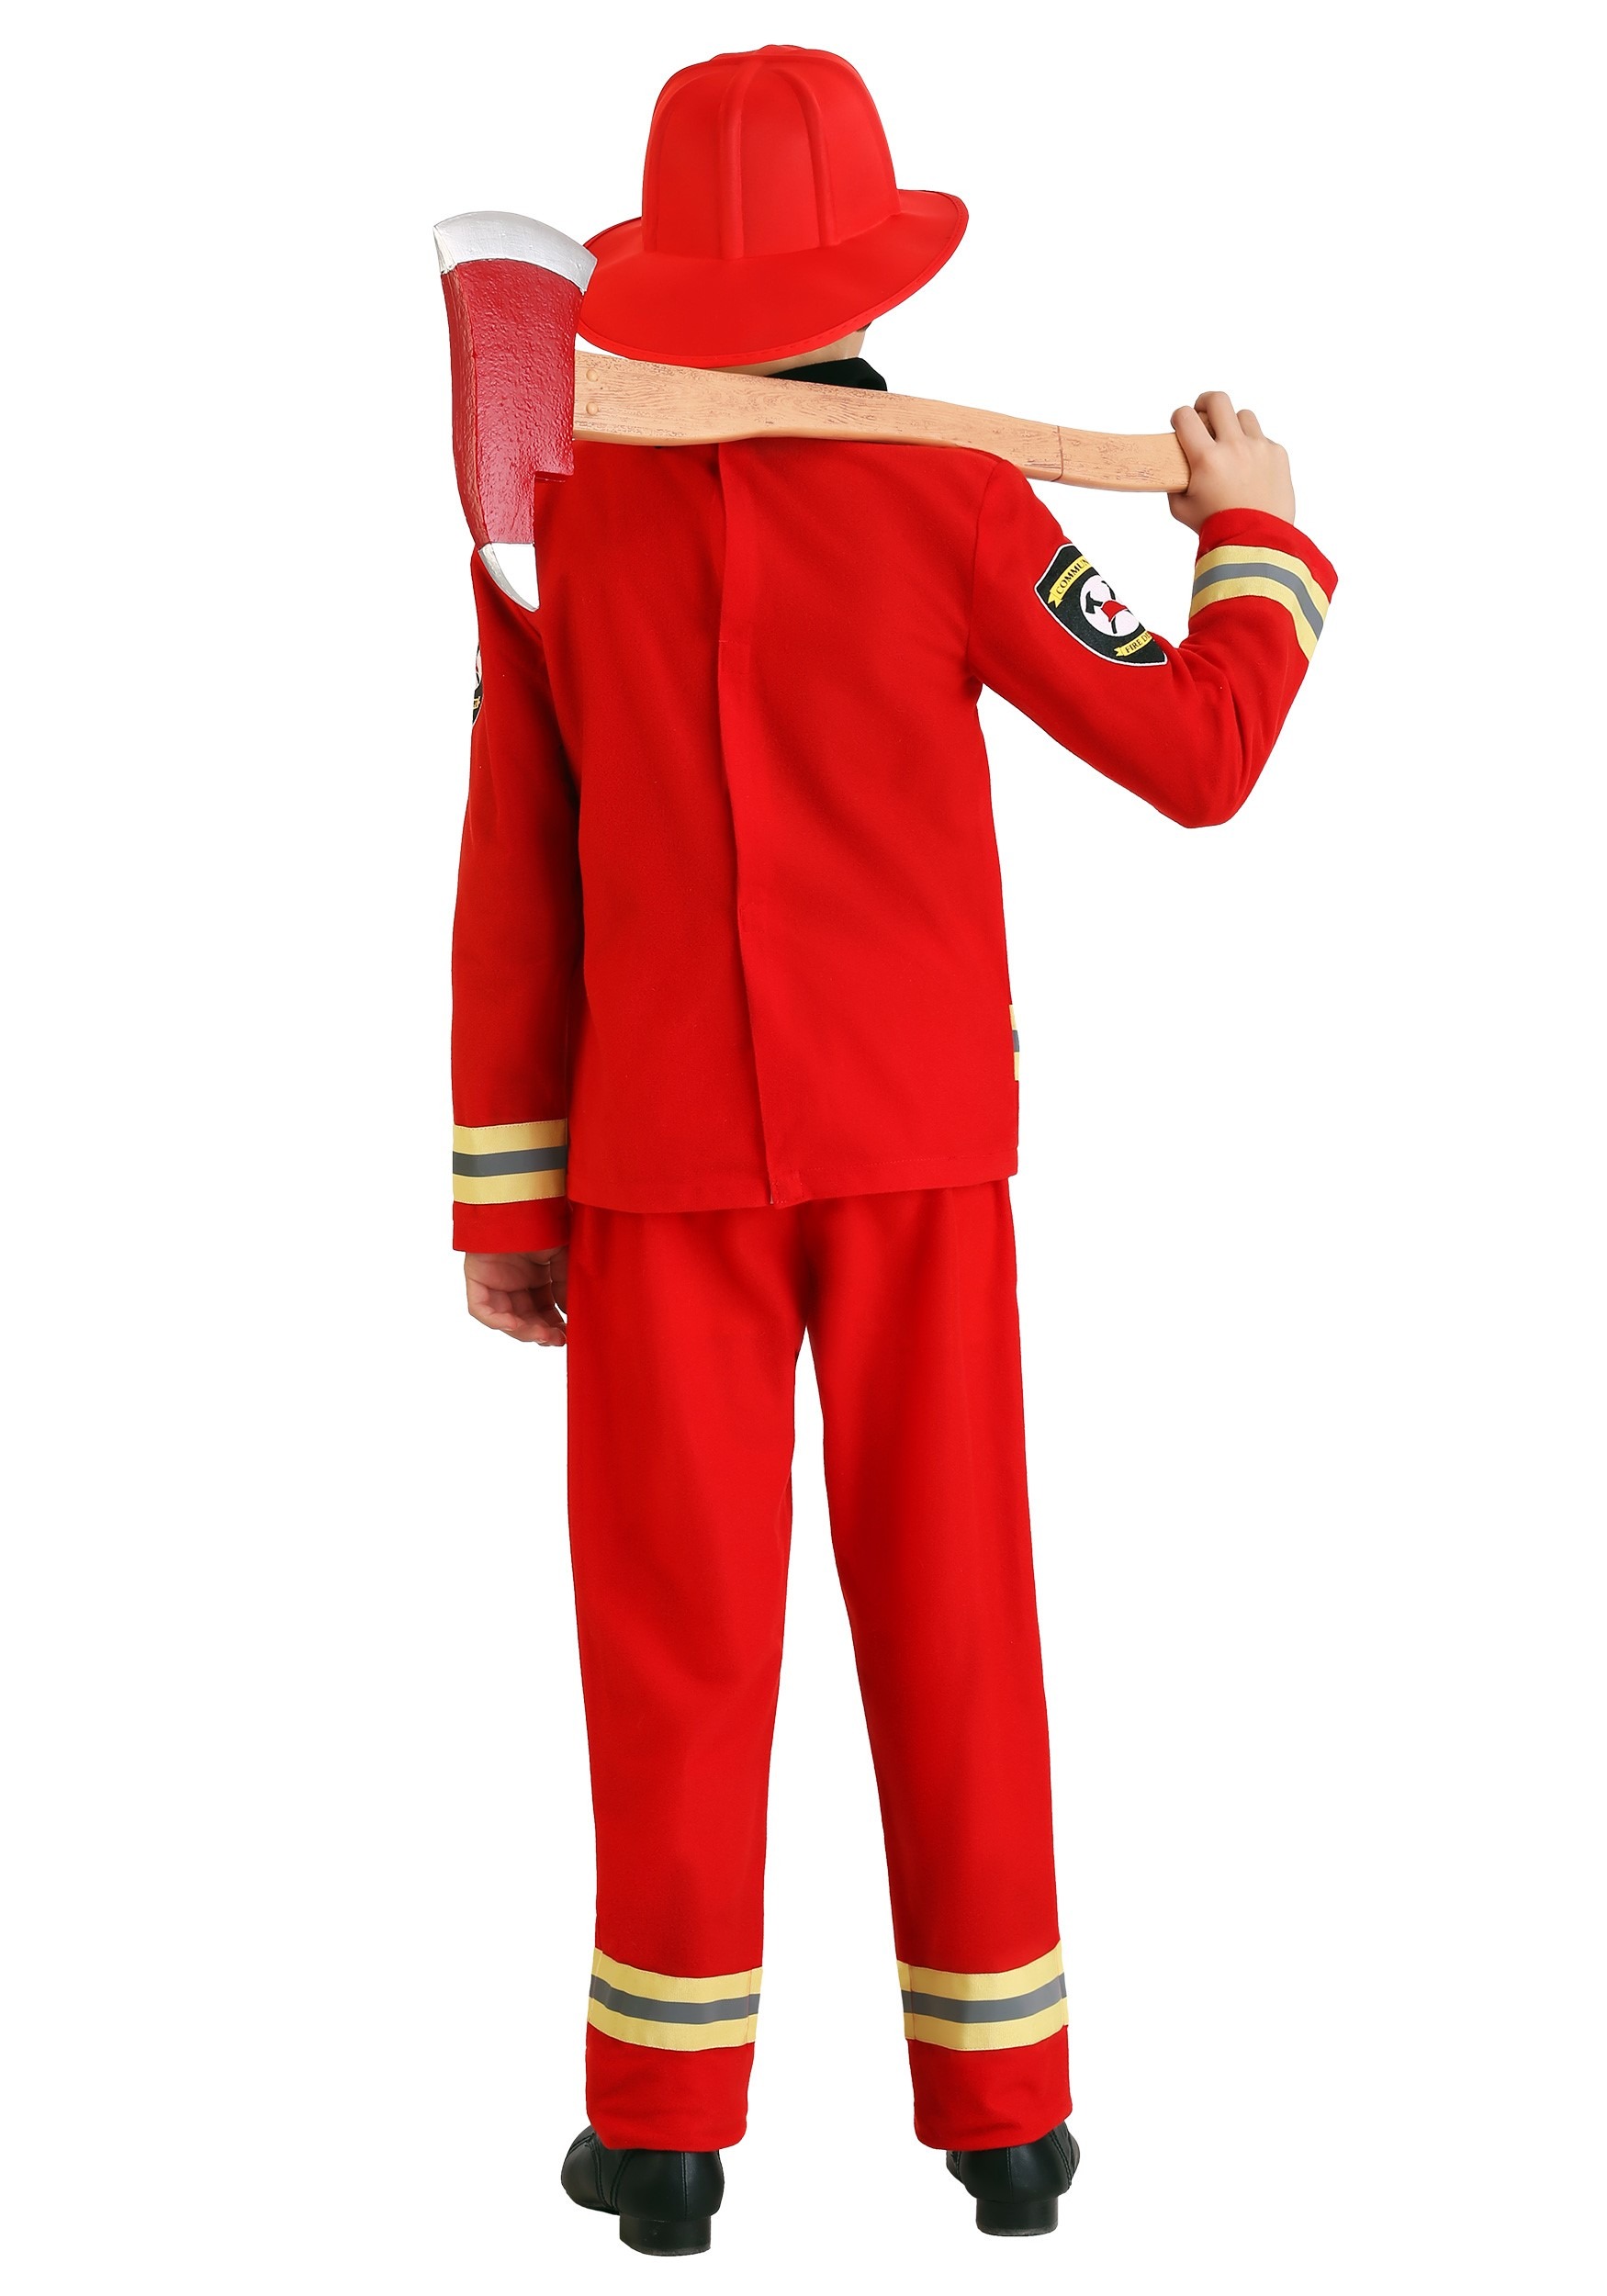 Child Friendly Firefighter Costume